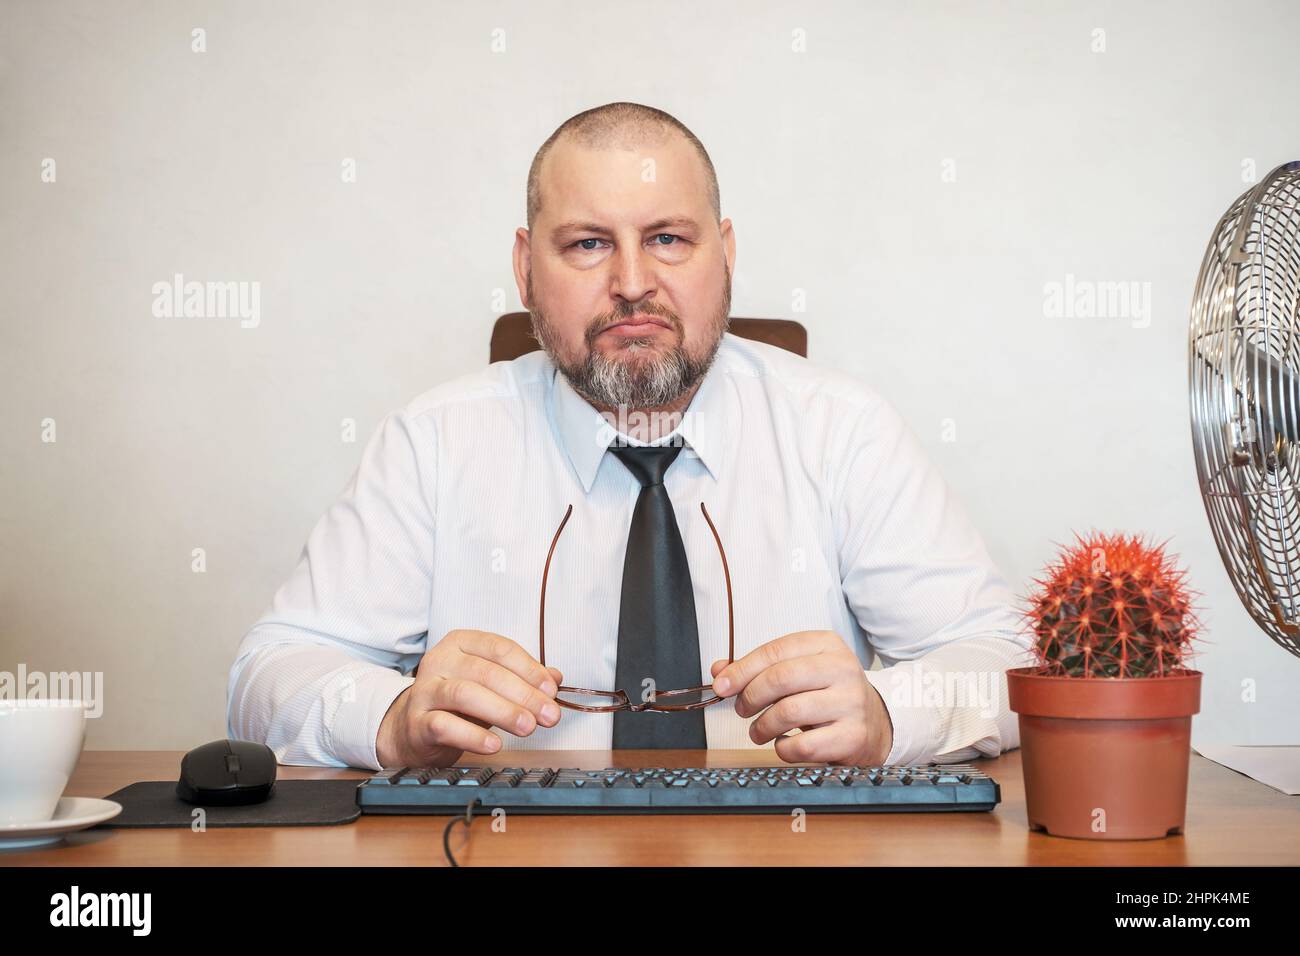 The man comically portrays the work of a businessman. He shows displeasure on his face and posture. Stock Photo